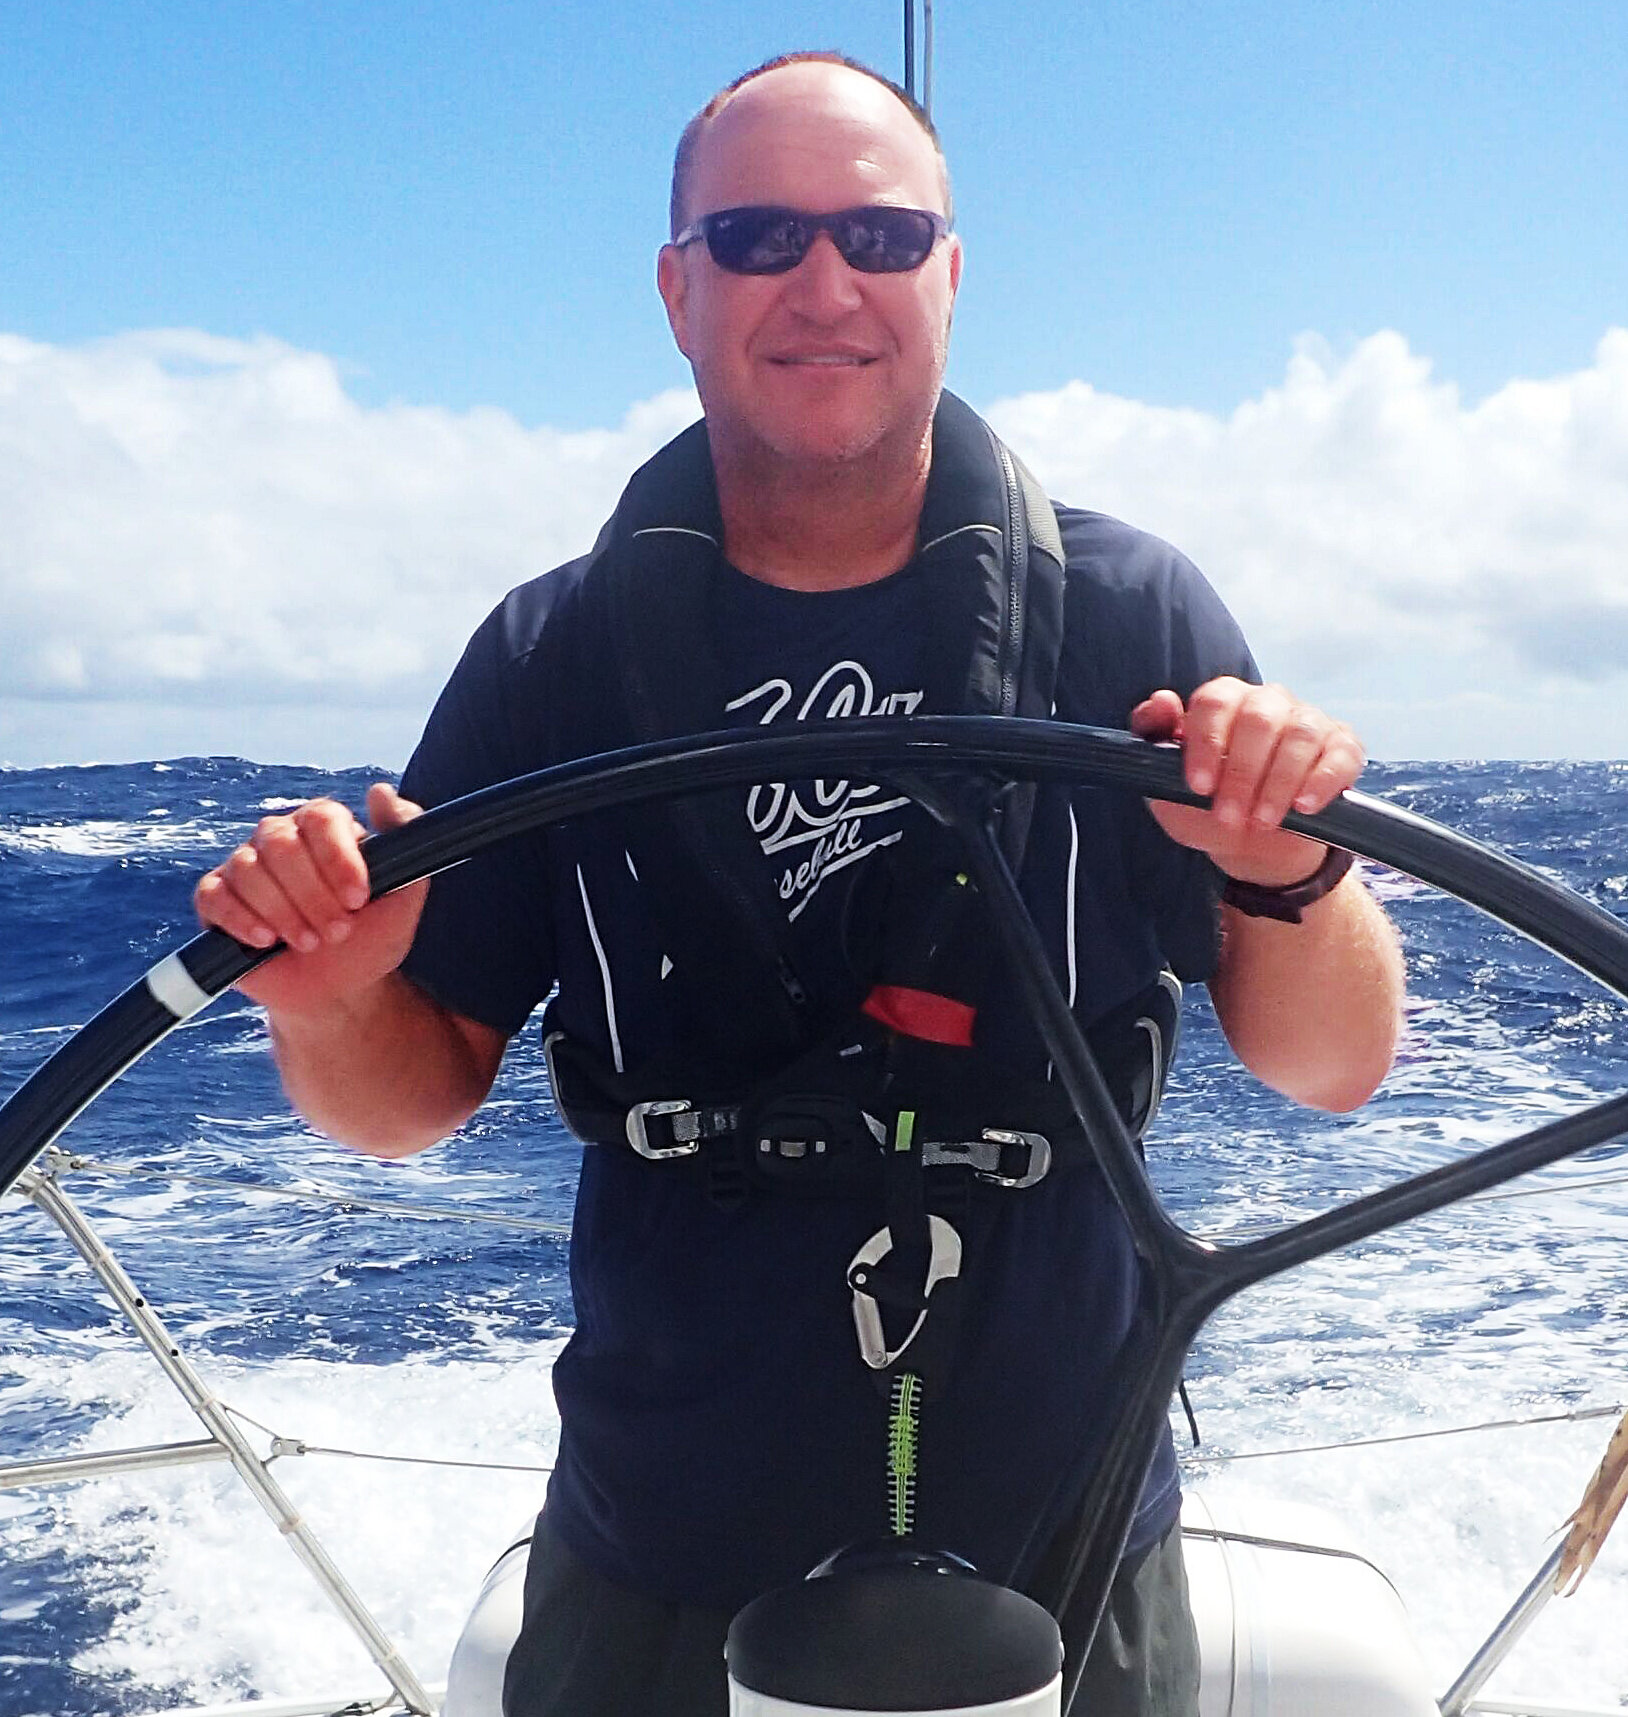 Brendan Huffman - is a lifetime sailor and accomplished cruiser and racer with six races to Hawaii under his belt. He is a U.S. Sailing certified keelboat instructor and former co-captain of the UCLA sailing team. 818.631.9216  email blh@uksailmakers.com